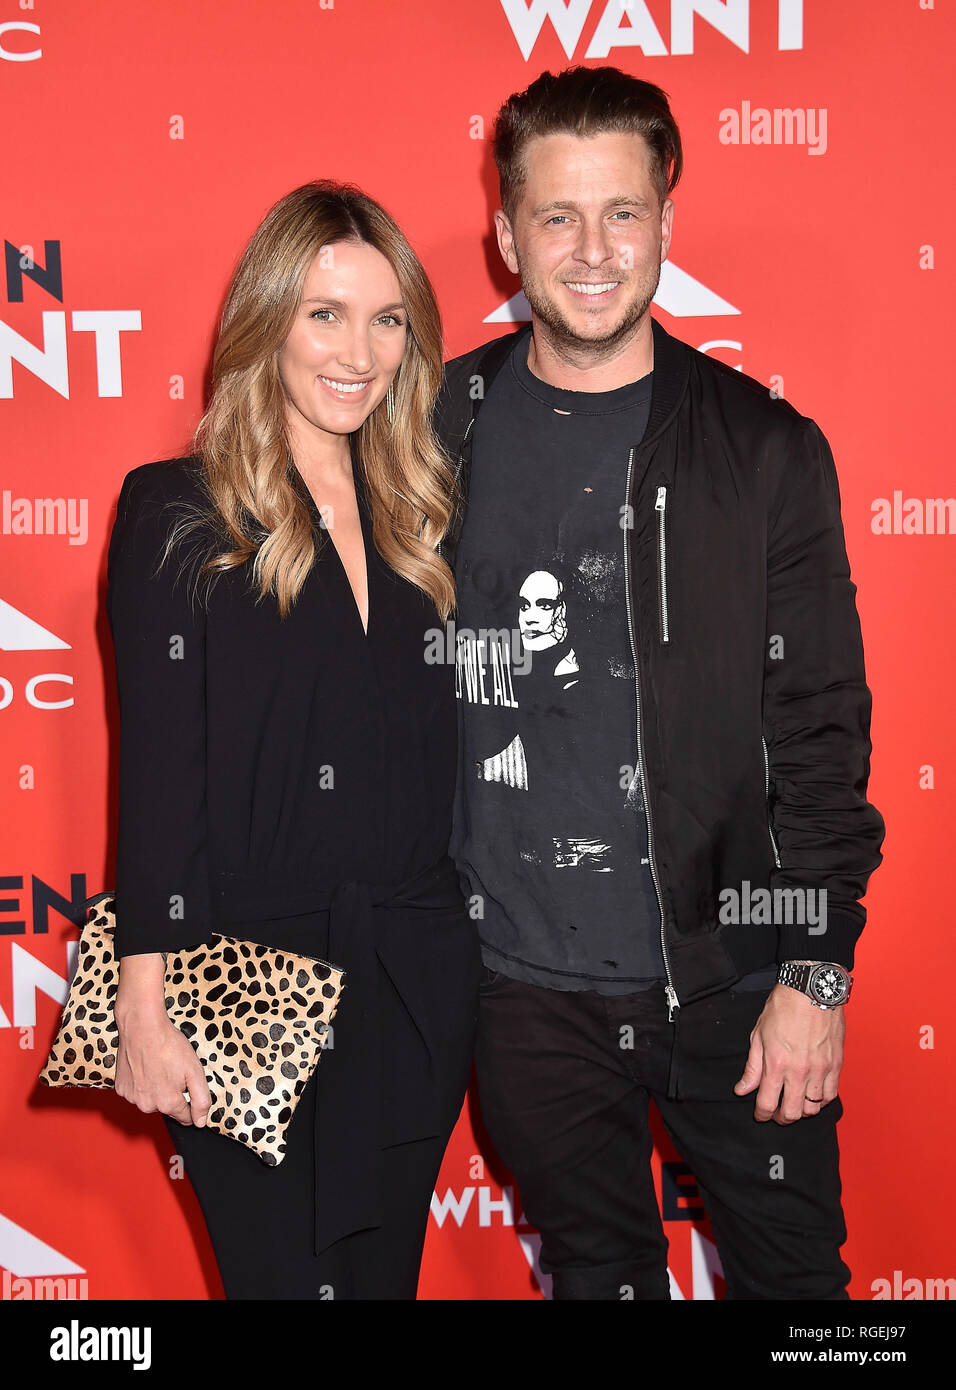 WESTWOOD, CA - JANUARY 28: Ryan Tedder, singer of OneRepublic (R) and and wife Genevieve Tedder arrive for Paramount Pictures' 'What Men Want' Premiere held at Regency Village Theatre on January 28, 2019 in Westwood, California.. Credit: Jeffrey Mayer/Alamy Live News Stock Photo